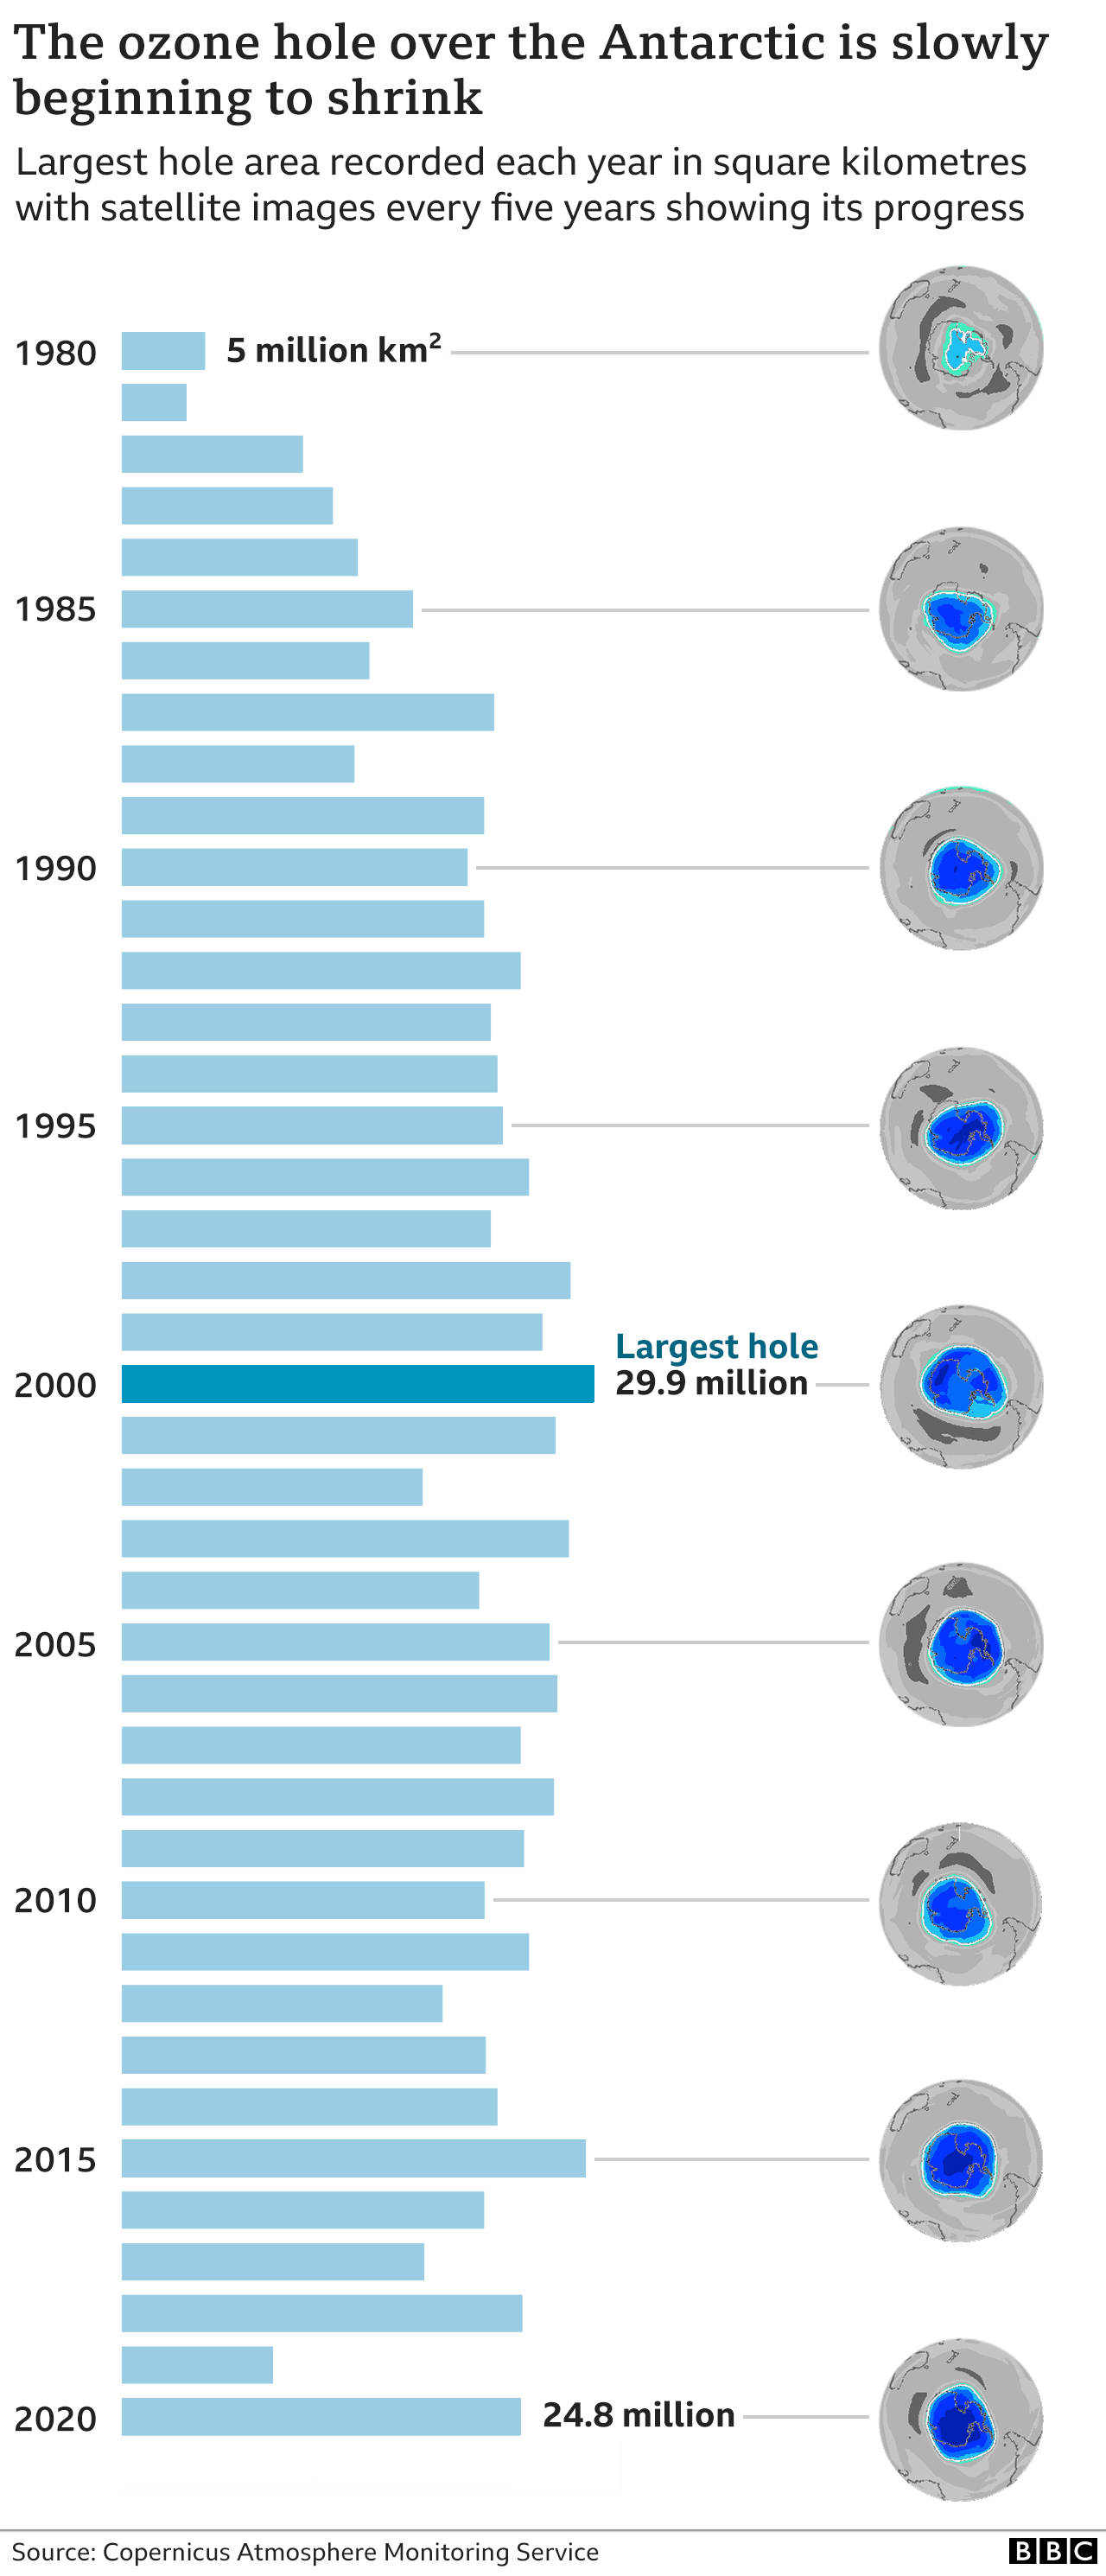 Graphic showing the maximum size of the ozone hole over the Antarctic each year since 1980.